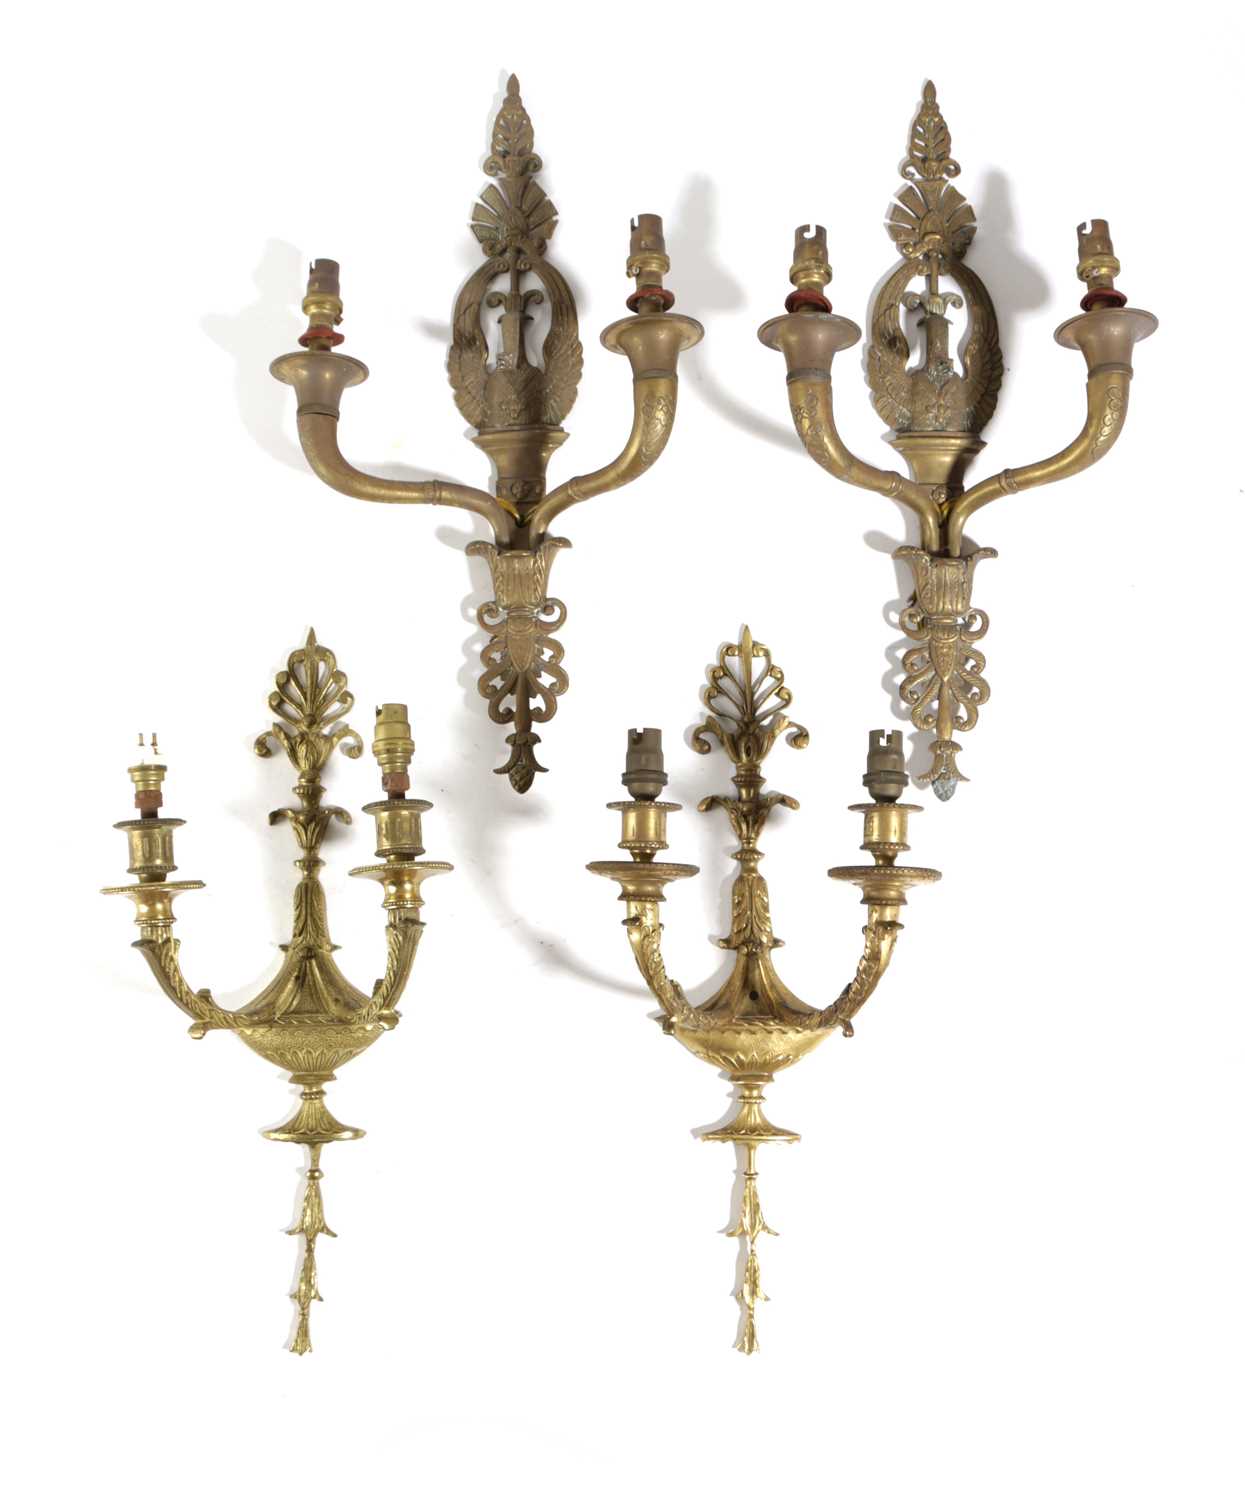 A PAIR OF BRASS WALL LIGHTS IN EMPIRE STYLE, LATE 19TH CENTURY modelled as a swan and acanthus